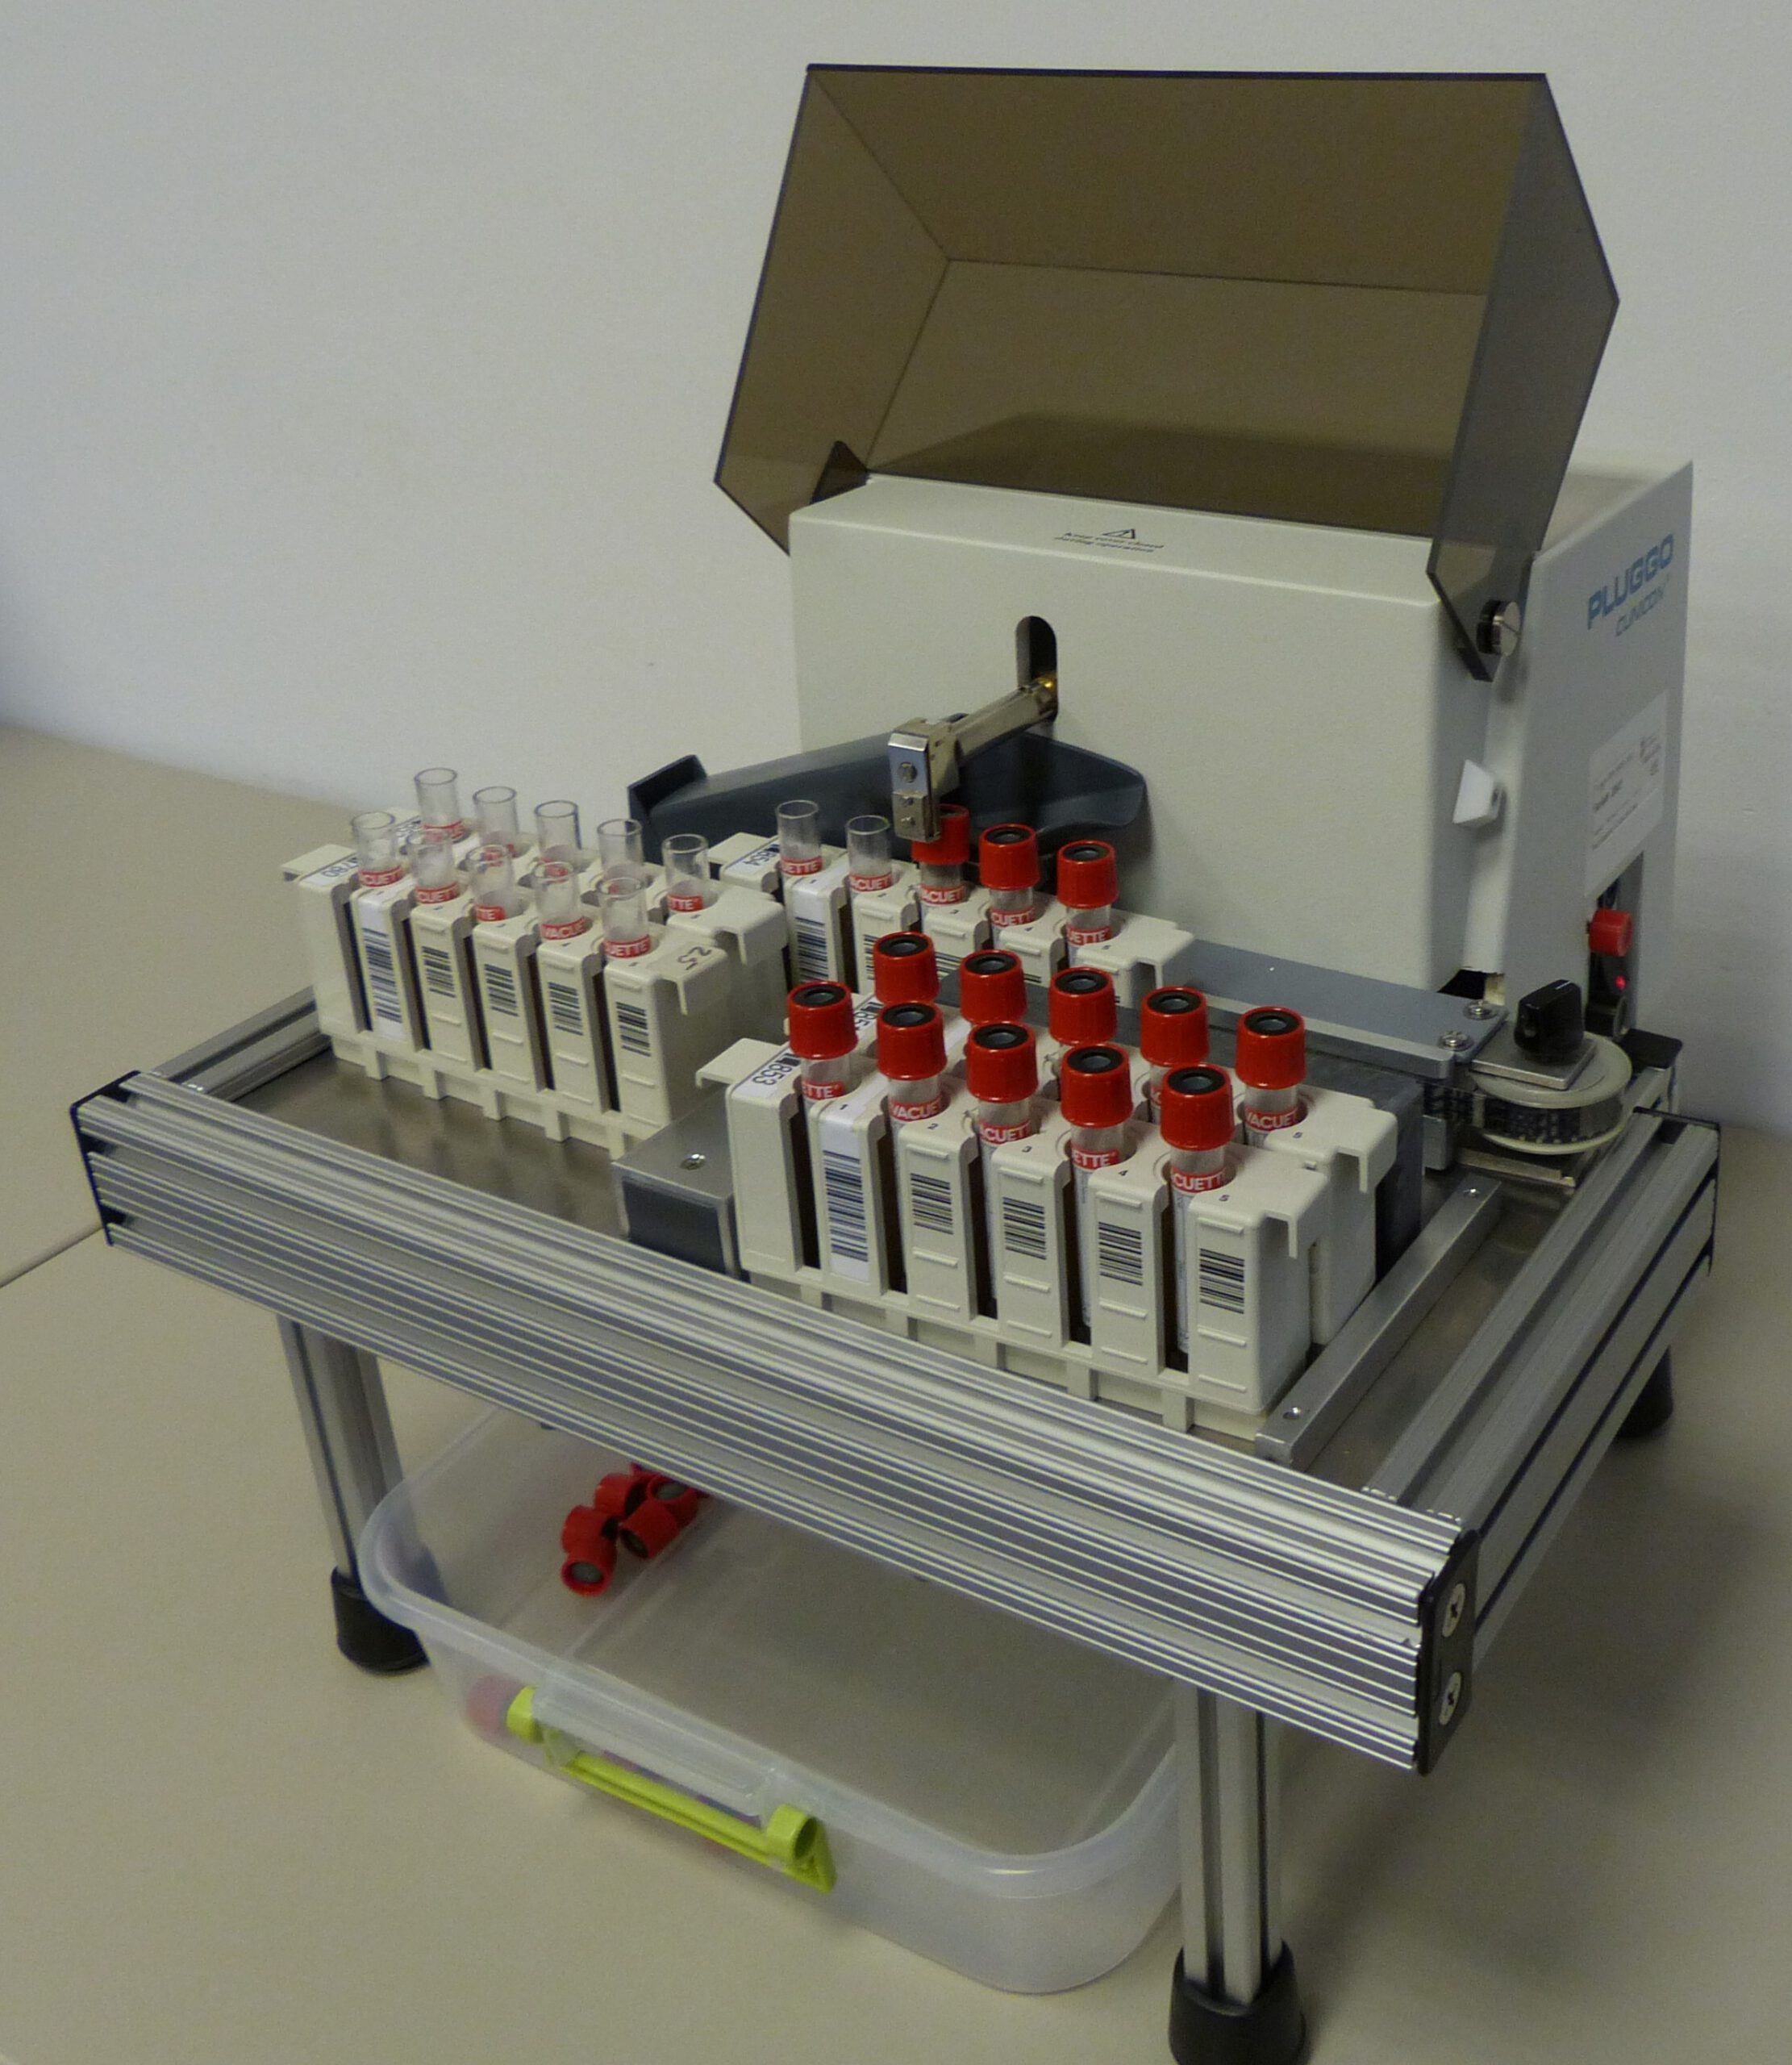 Picture of the decapper KapSafe showing different analyzer racks that can be handled by the device